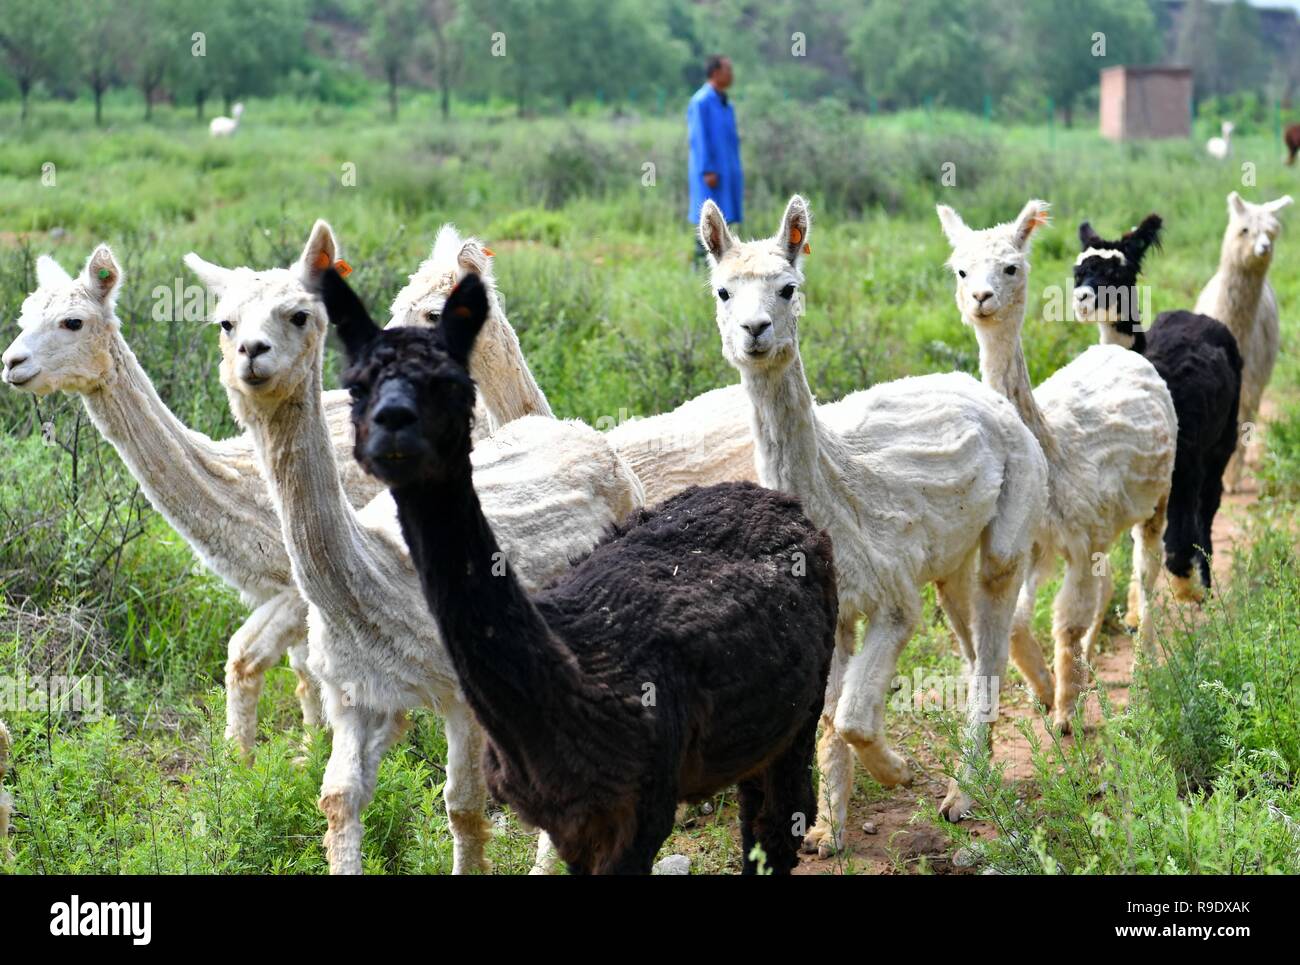 (181223) -- BEIJING, Dec. 23, 2018 (Xinhua) -- Alpacas graze on the hill in Yangqu County of north China's Shanxi Province, July 14, 2018. Liu Xuerong, a poverty-stricken farmer from Pingli Village of Yangqu County, started embarking on cultivating those Australia-originated alpacas in 2014. The breeding base makes a profit from cub breeding, woolen products and tourism of alpaca watching. Liu accordingly earns a monthly wage of 3,000 yuan (about 449 U.S. dollars). Areas of China suffering from extreme poverty have made faster progress in terms of poverty relief compared to the country's avera Stock Photo